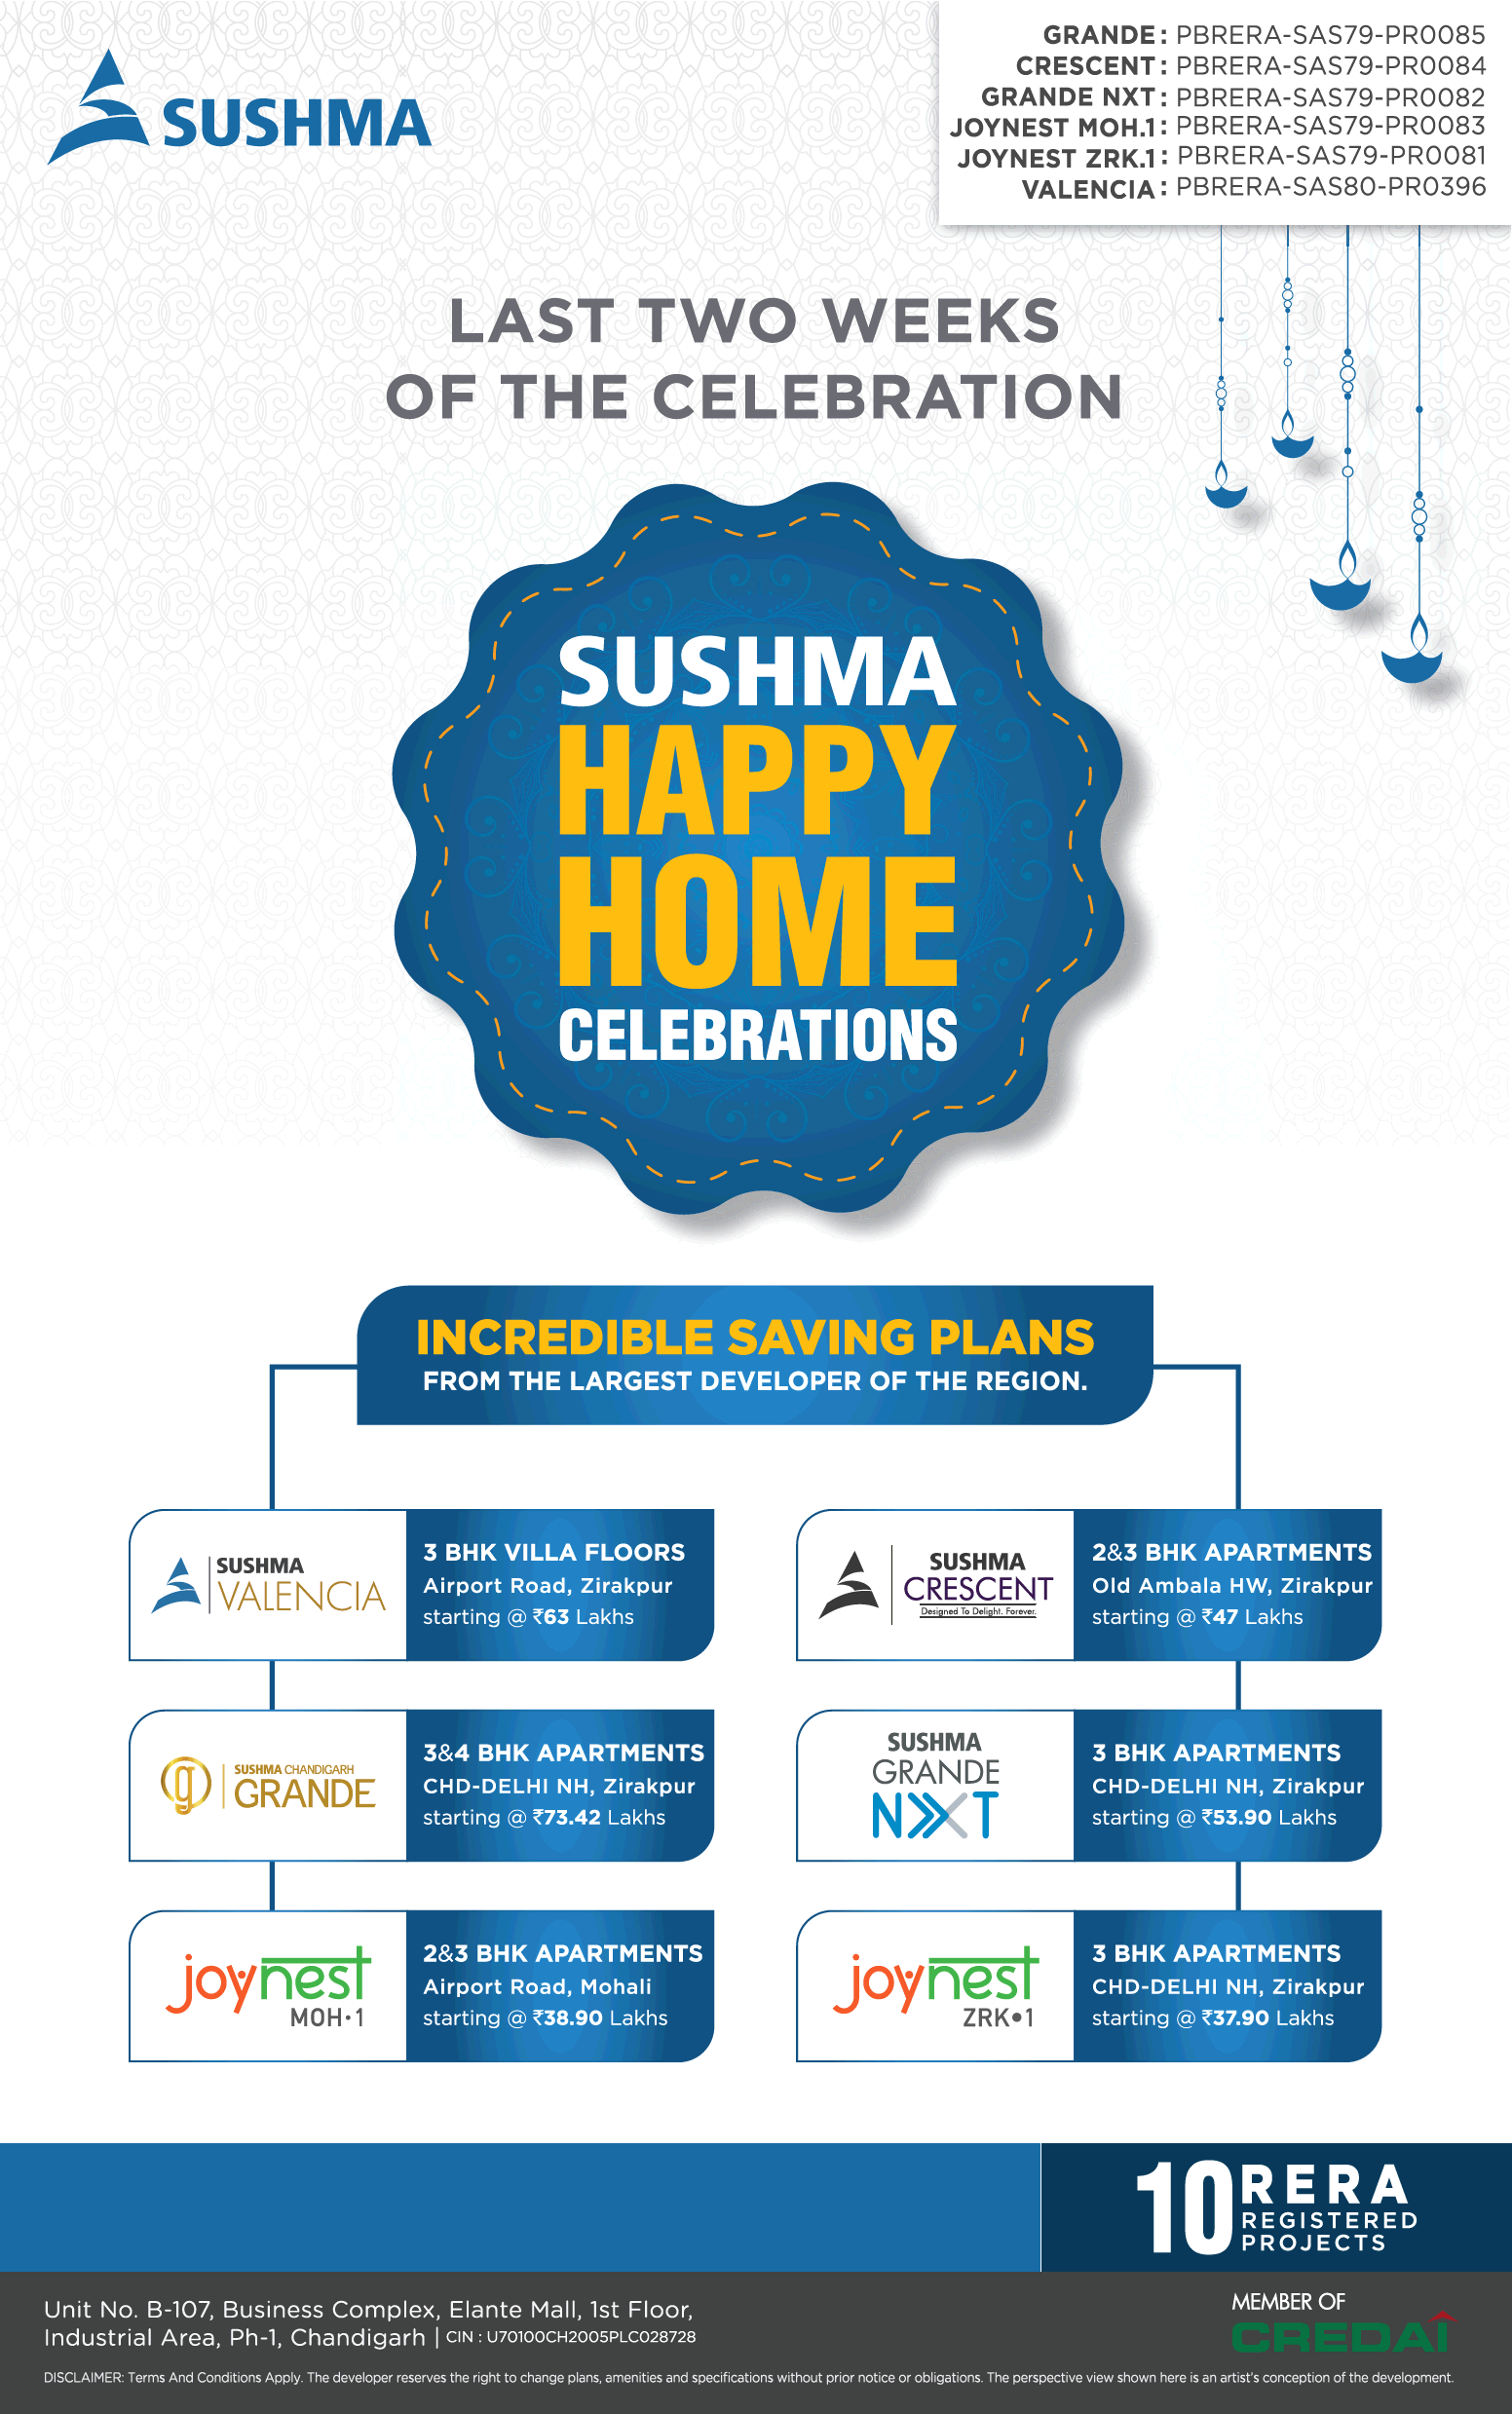 Last two weeks of the celebration at Sushma Buildtech, Chandigarh